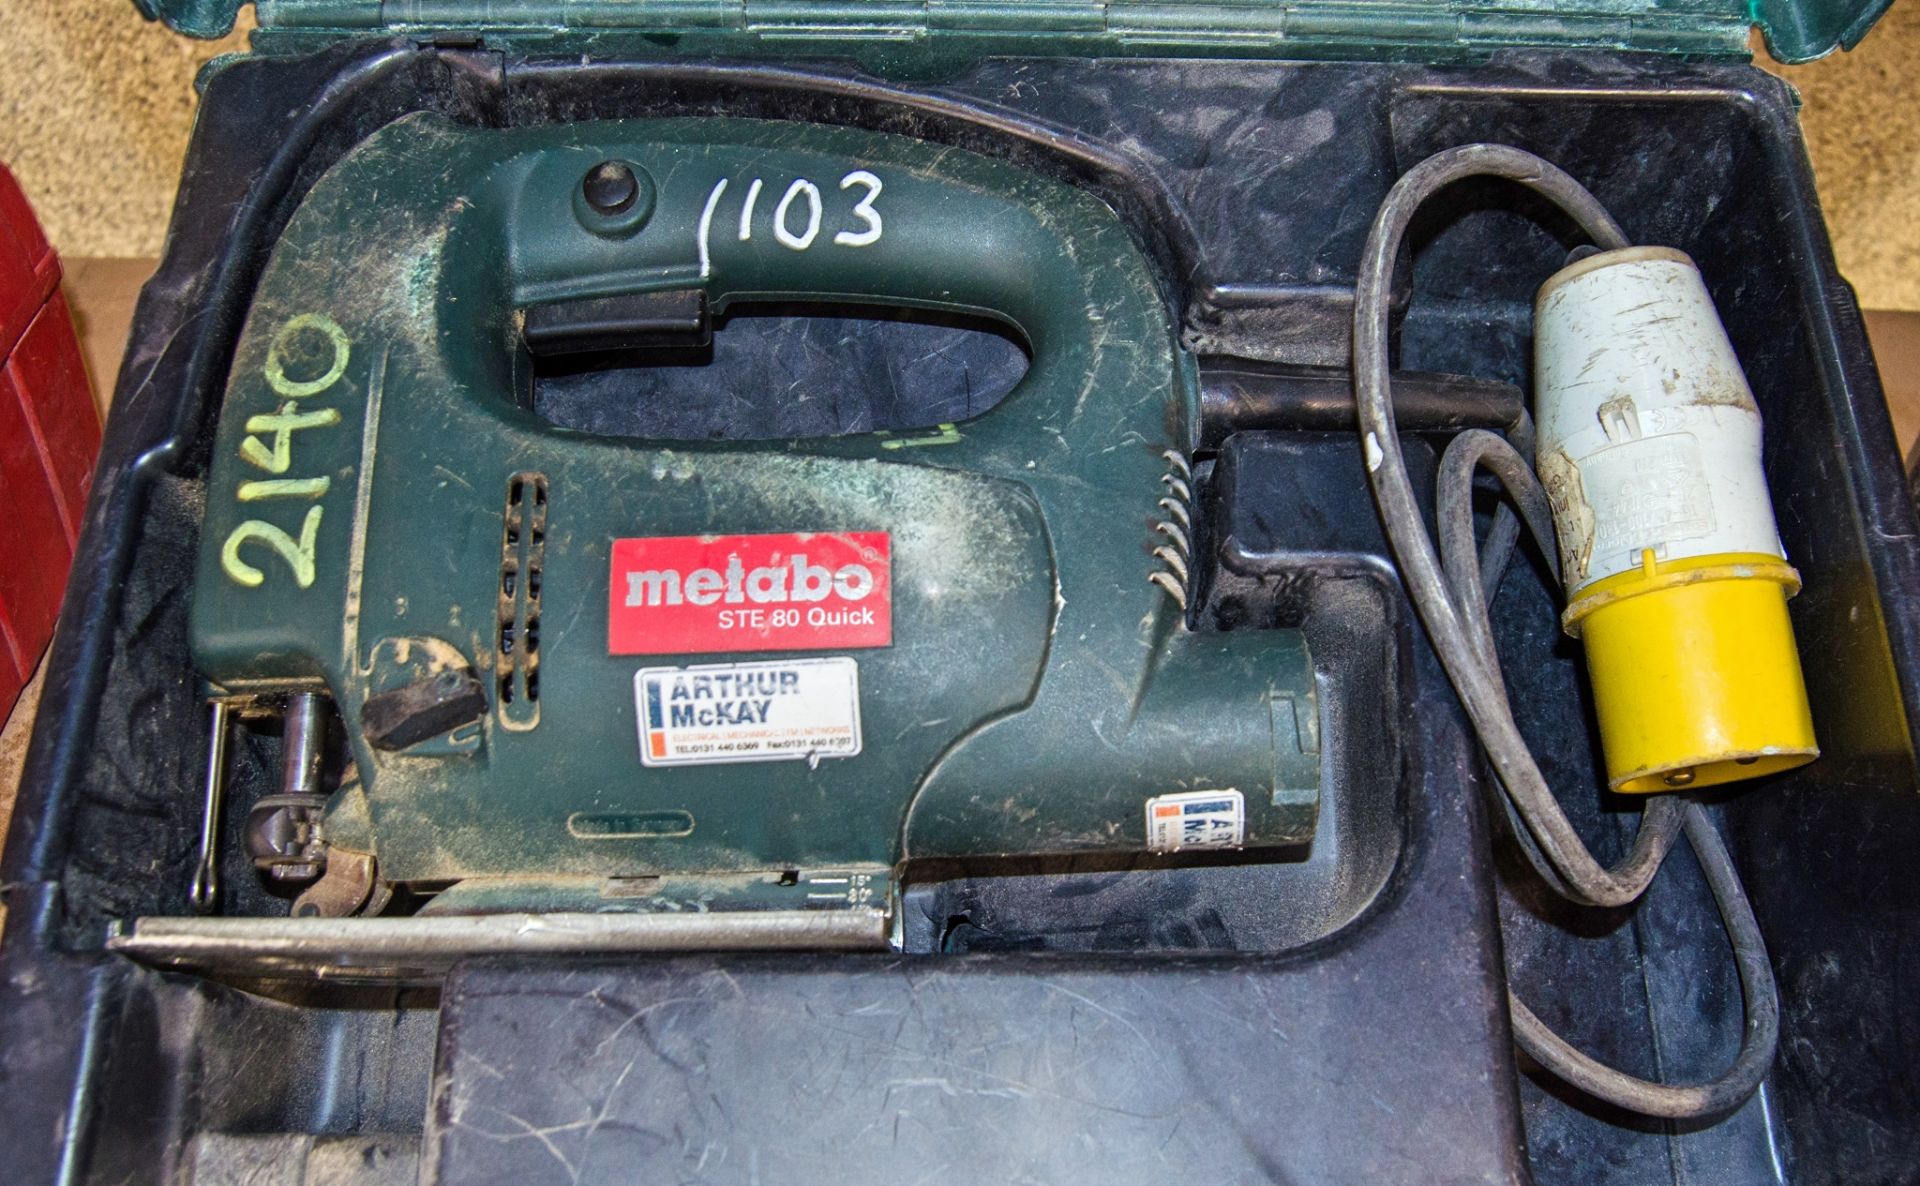 Metabo STE-80 Quick 110v jigsaw c/w carry case AM2140